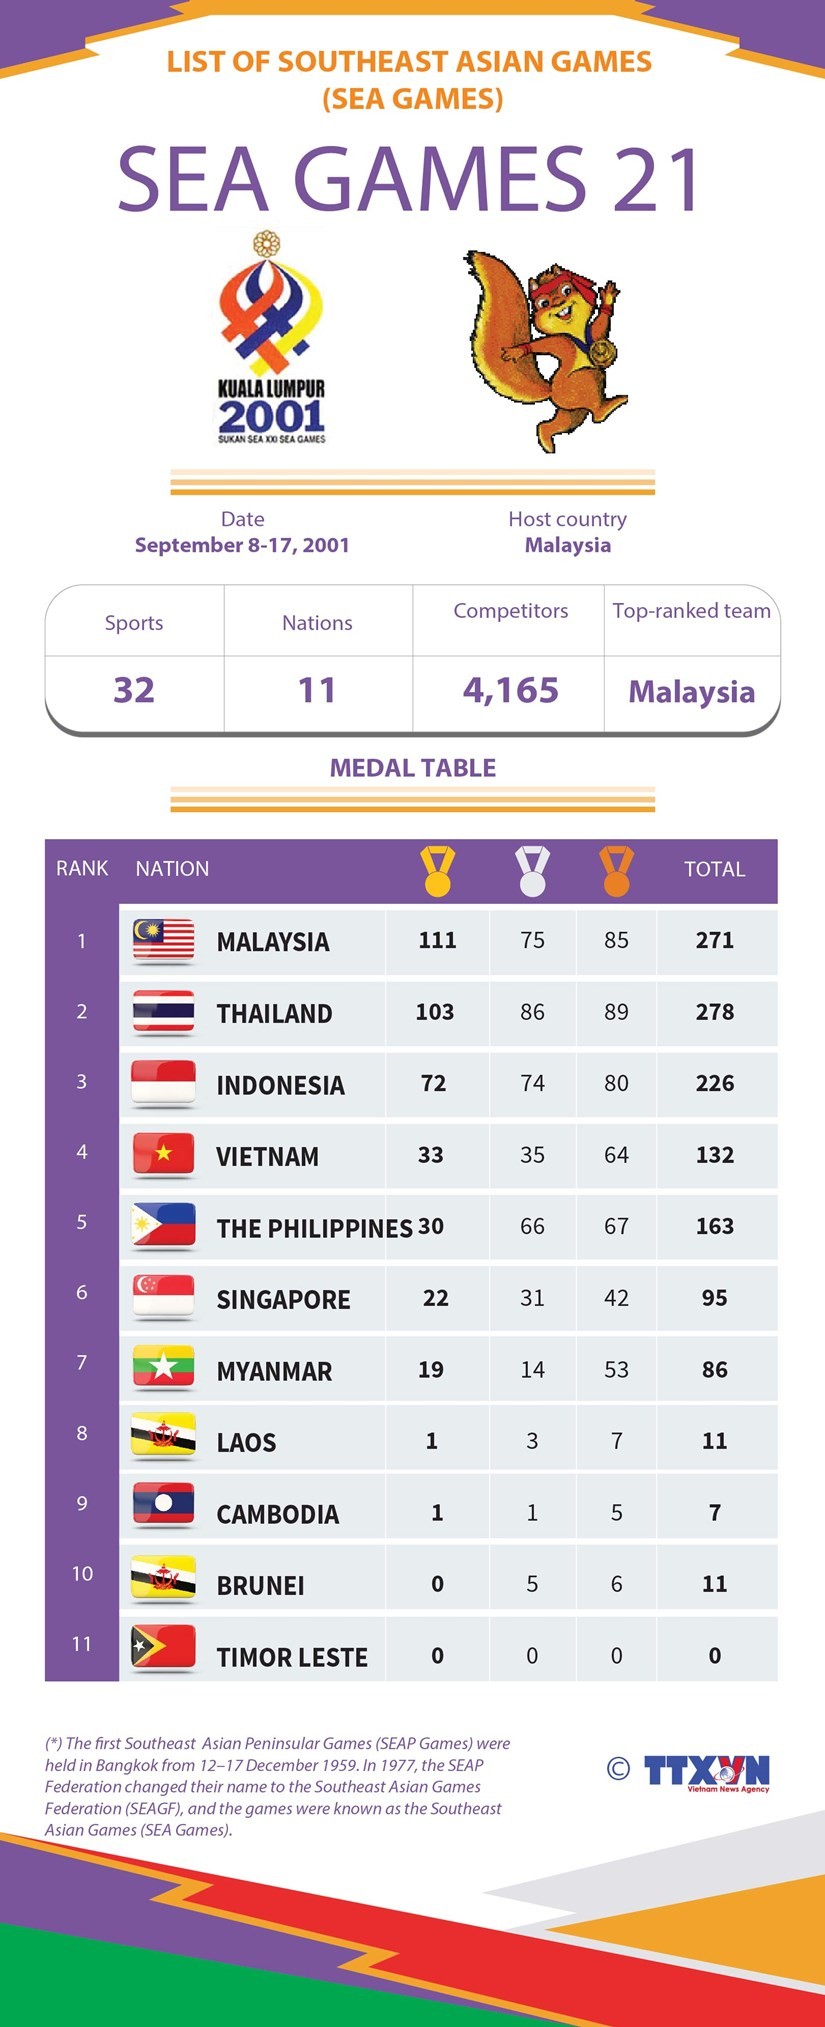 List of Southeast Asian Games: SEA Games 21